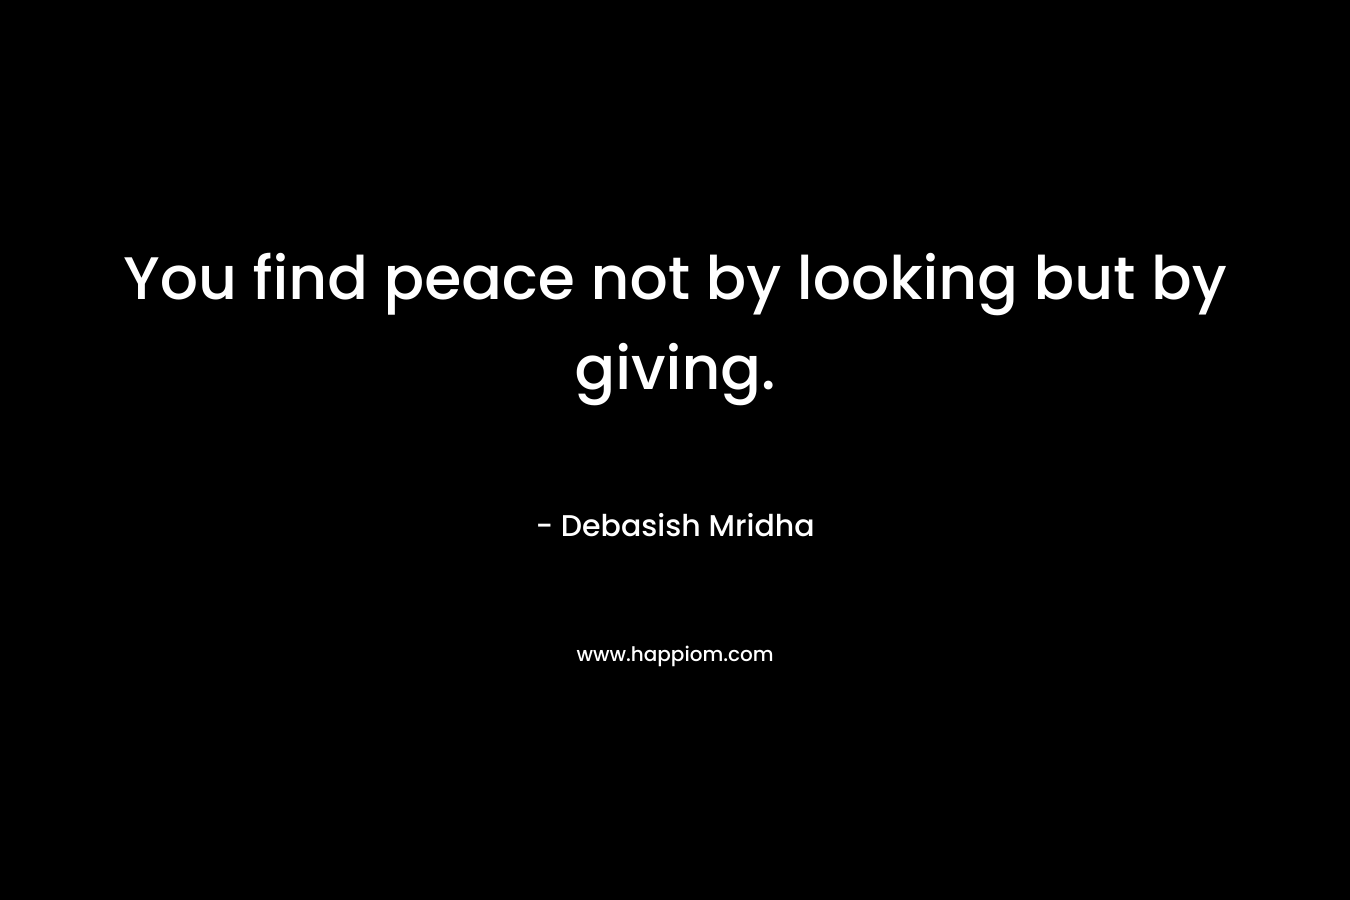 You find peace not by looking but by giving.